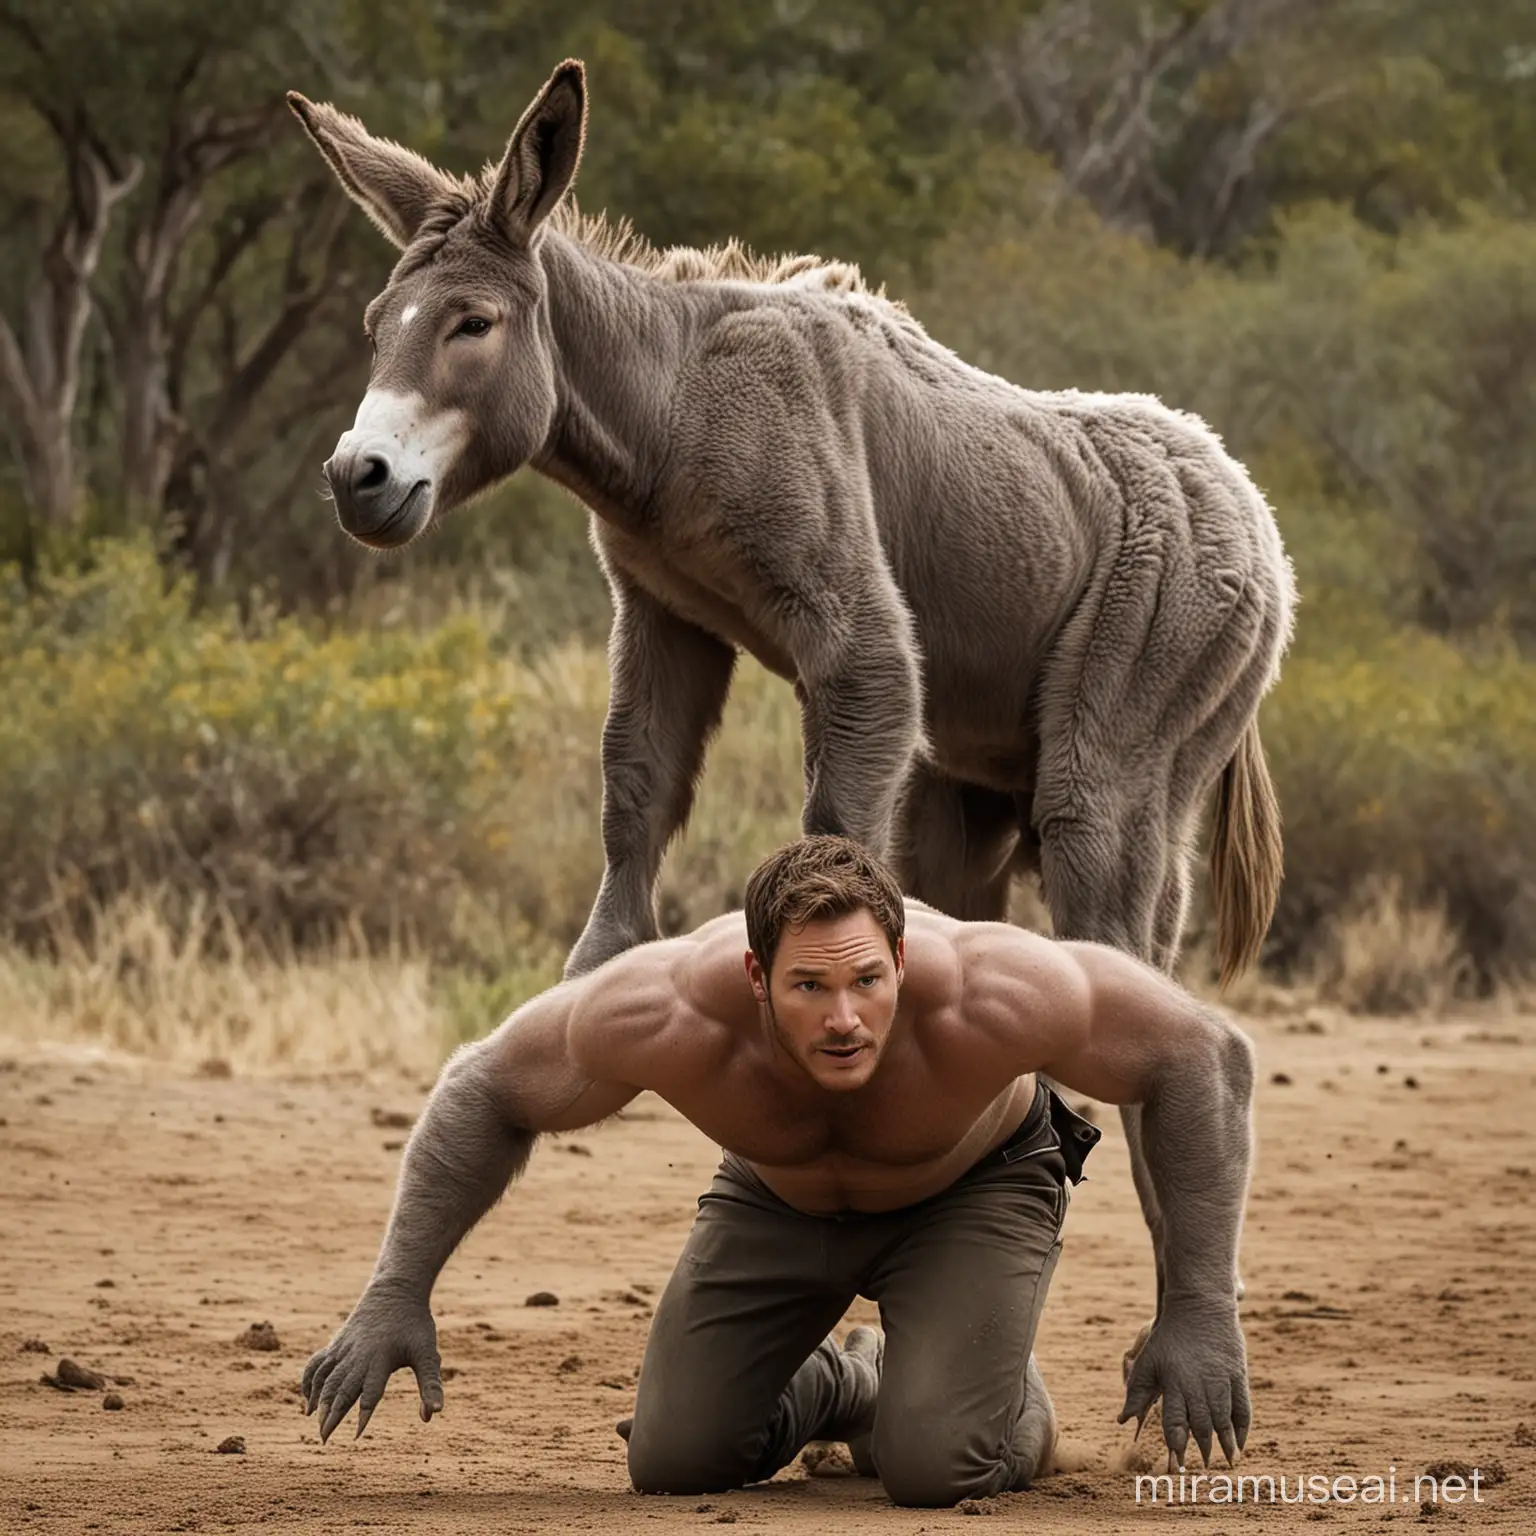 Chris Pratt on all fours transforming into a donkey. His ears stretching into donkey ears. His neck stretching into a donkey neck. His hair becoming a donkey's mane. His pants ripping apart to reveal he has the hindquarters of a donkey. A donkey tail is dangling from his rear. And he's braying like a donkey.